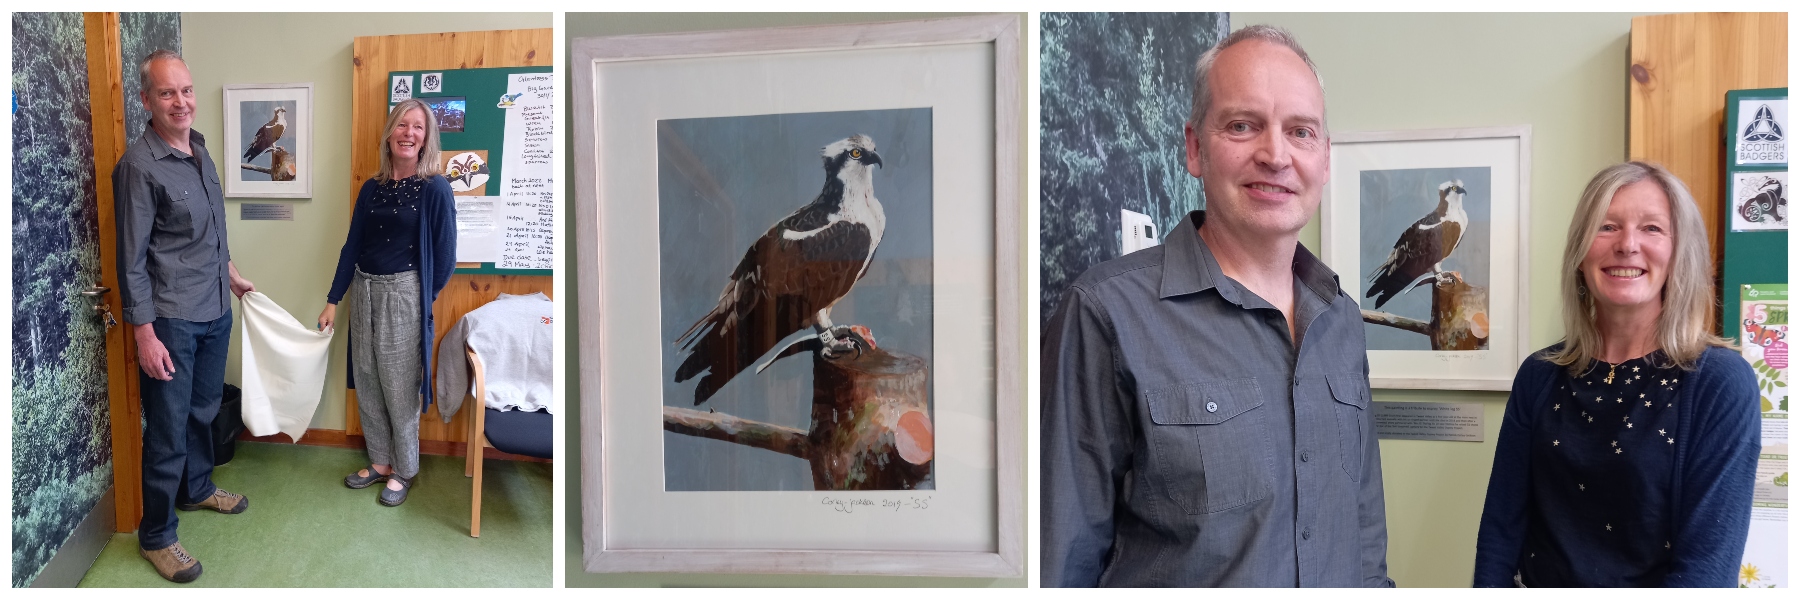 A painting of an osprey unveiled by a man and woman